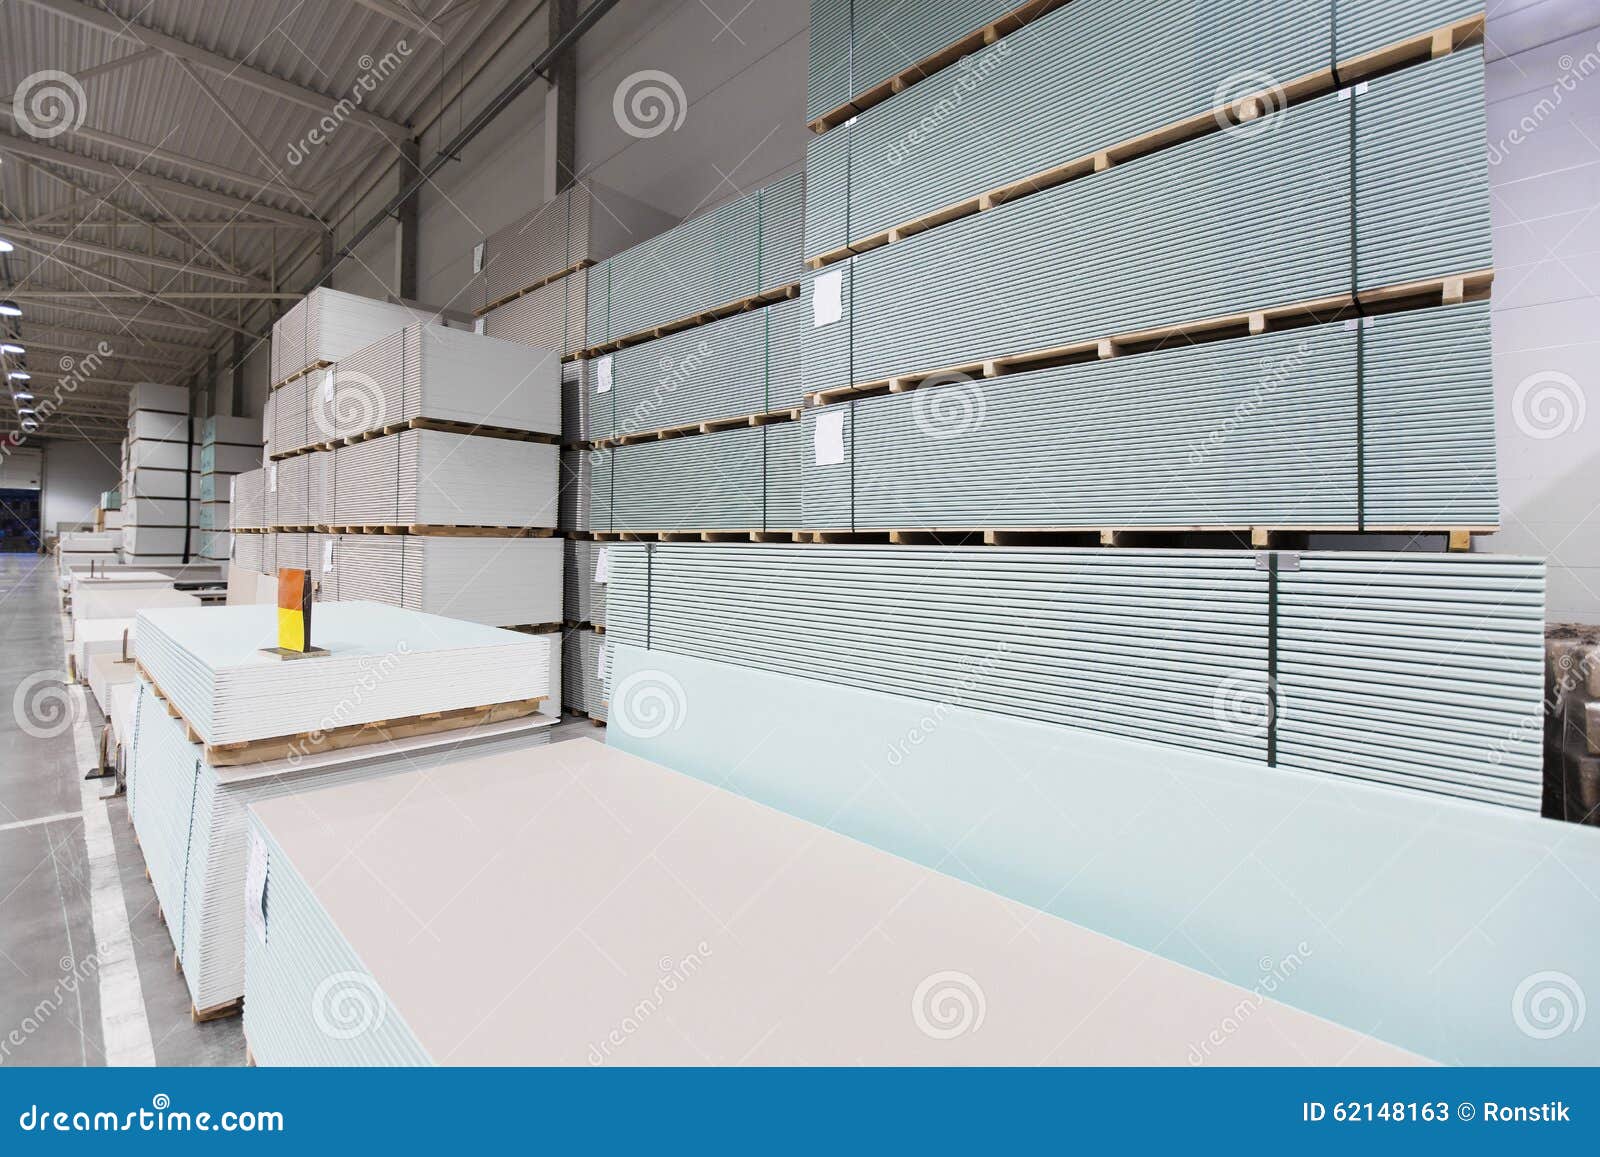 warehouse with construction plasterboard